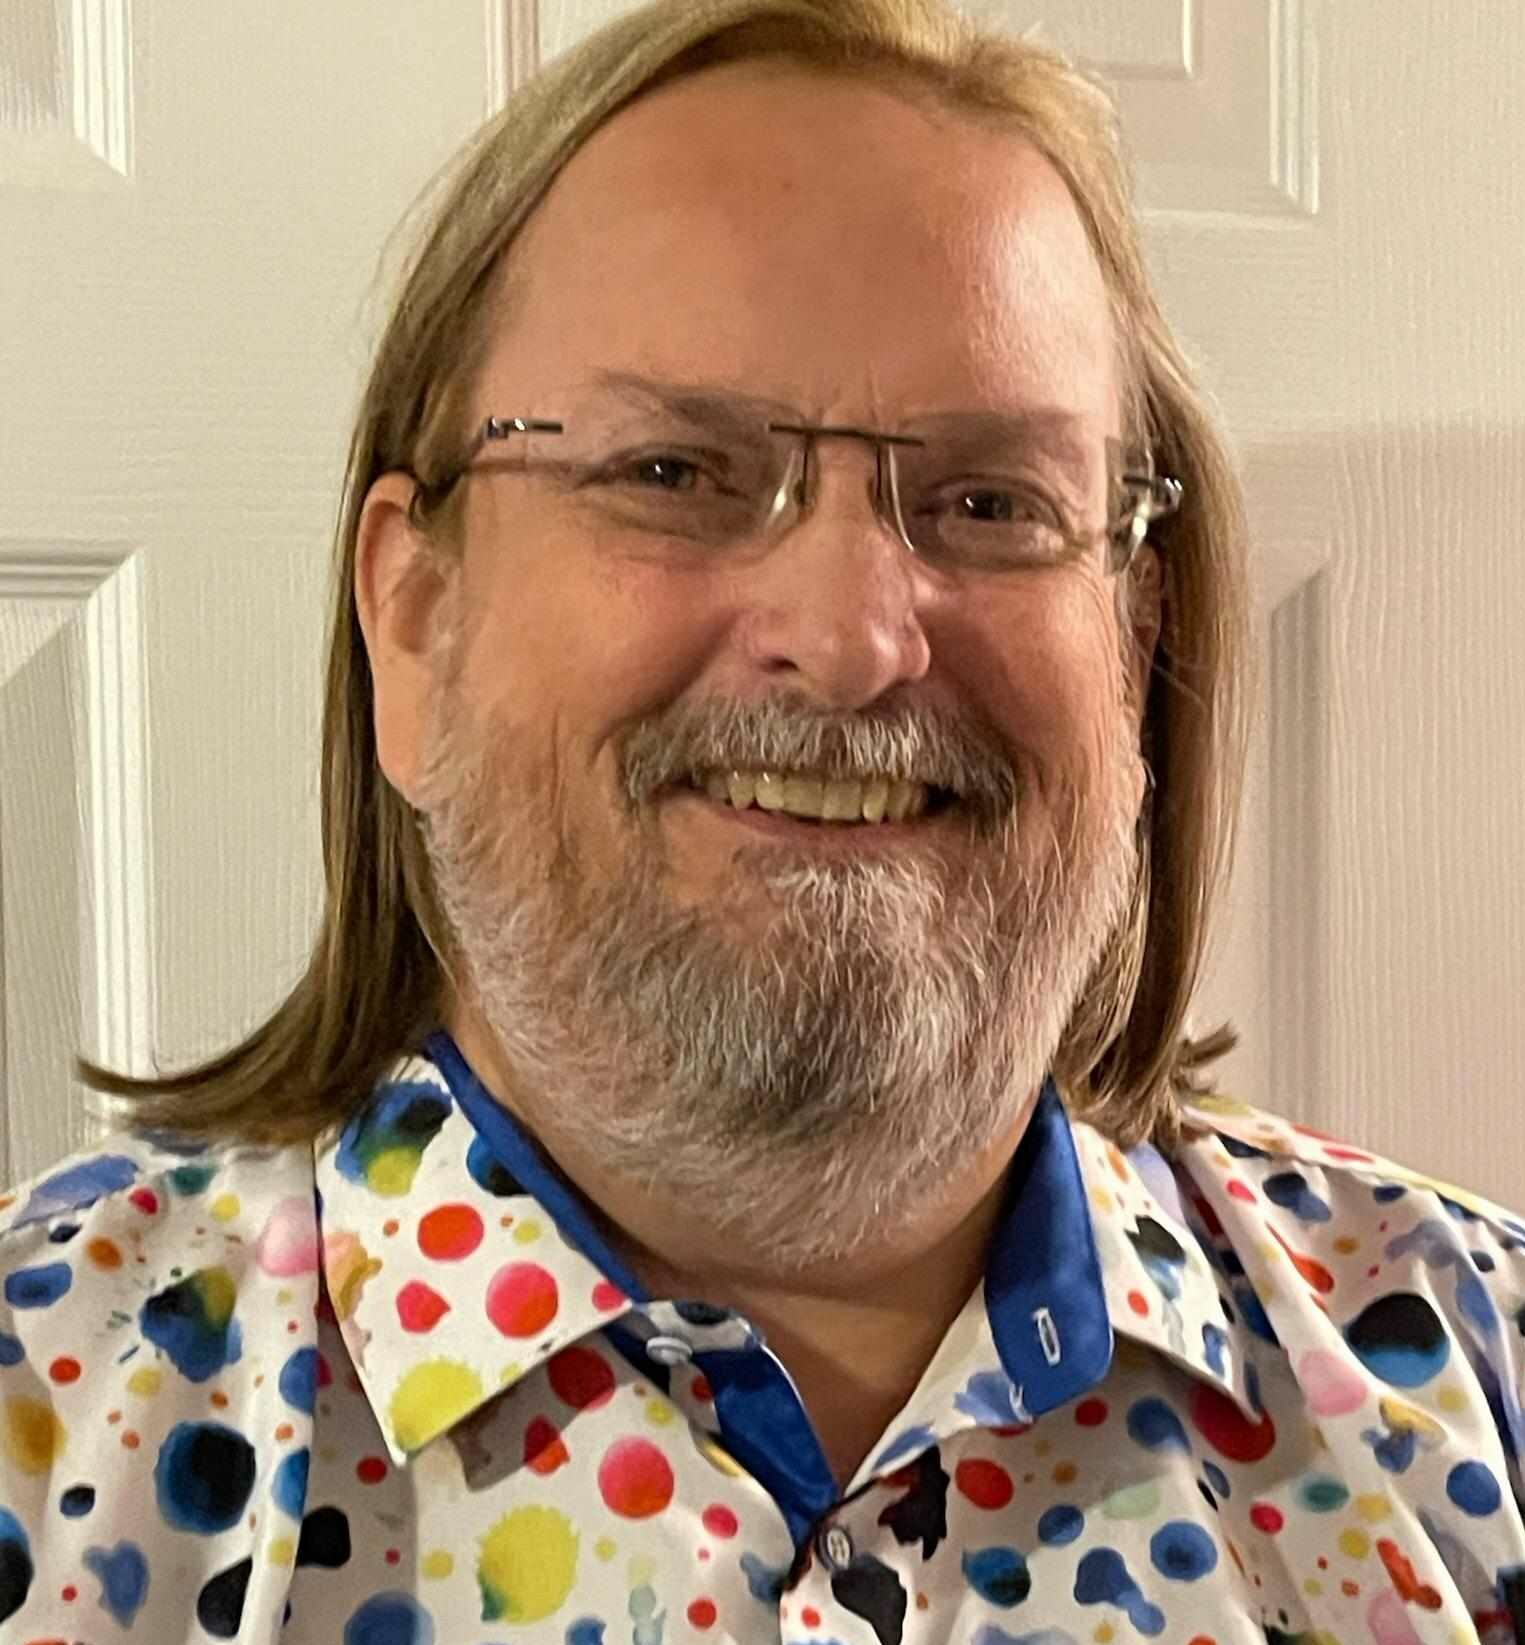 picture of a man with a colorful shirt on